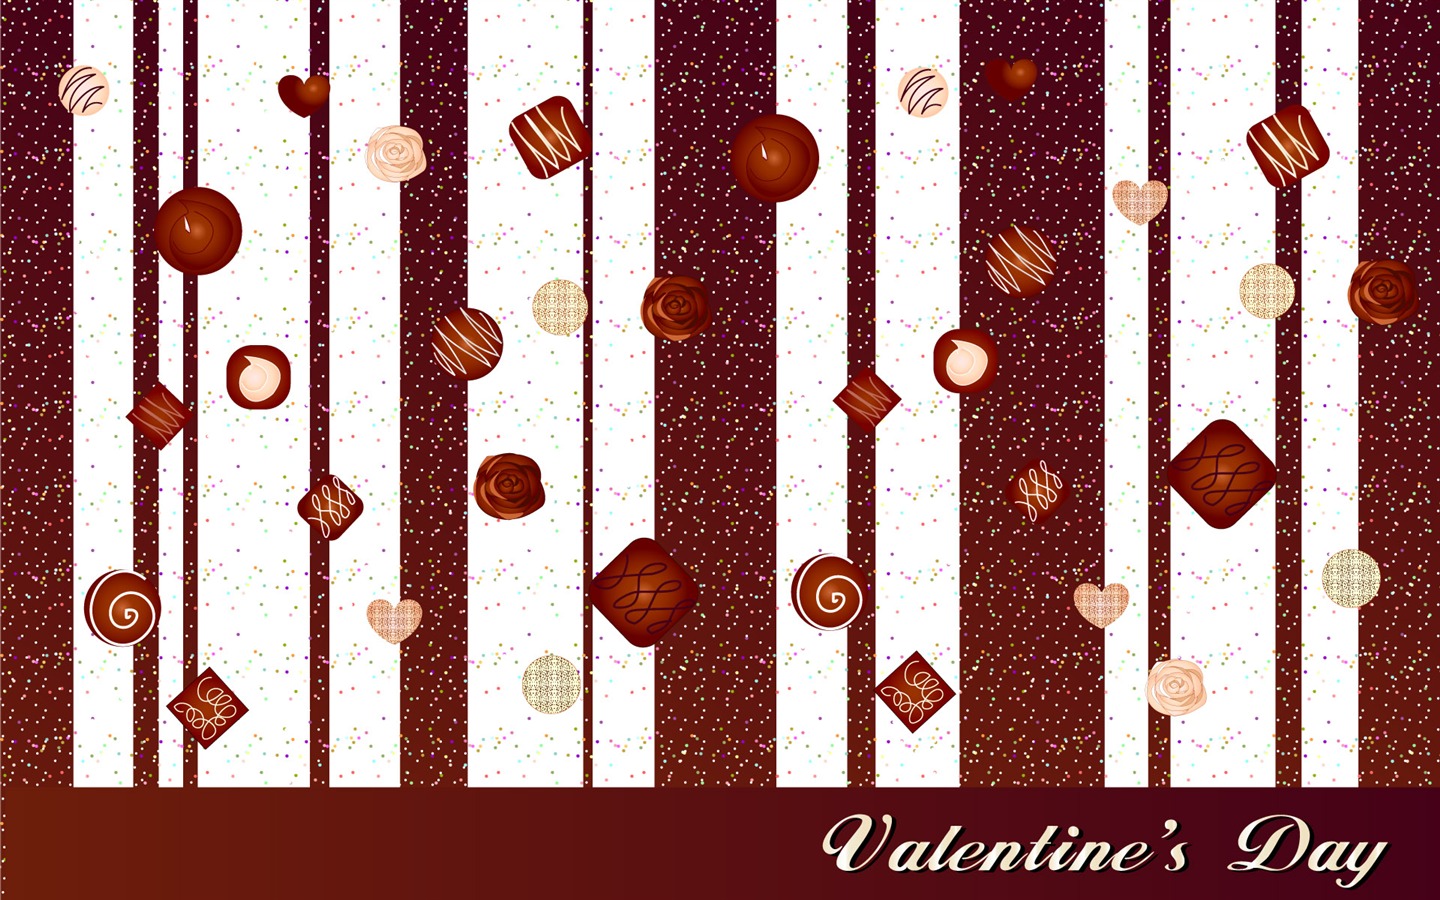 Valentine's Day Theme Wallpapers (1) #18 - 1440x900